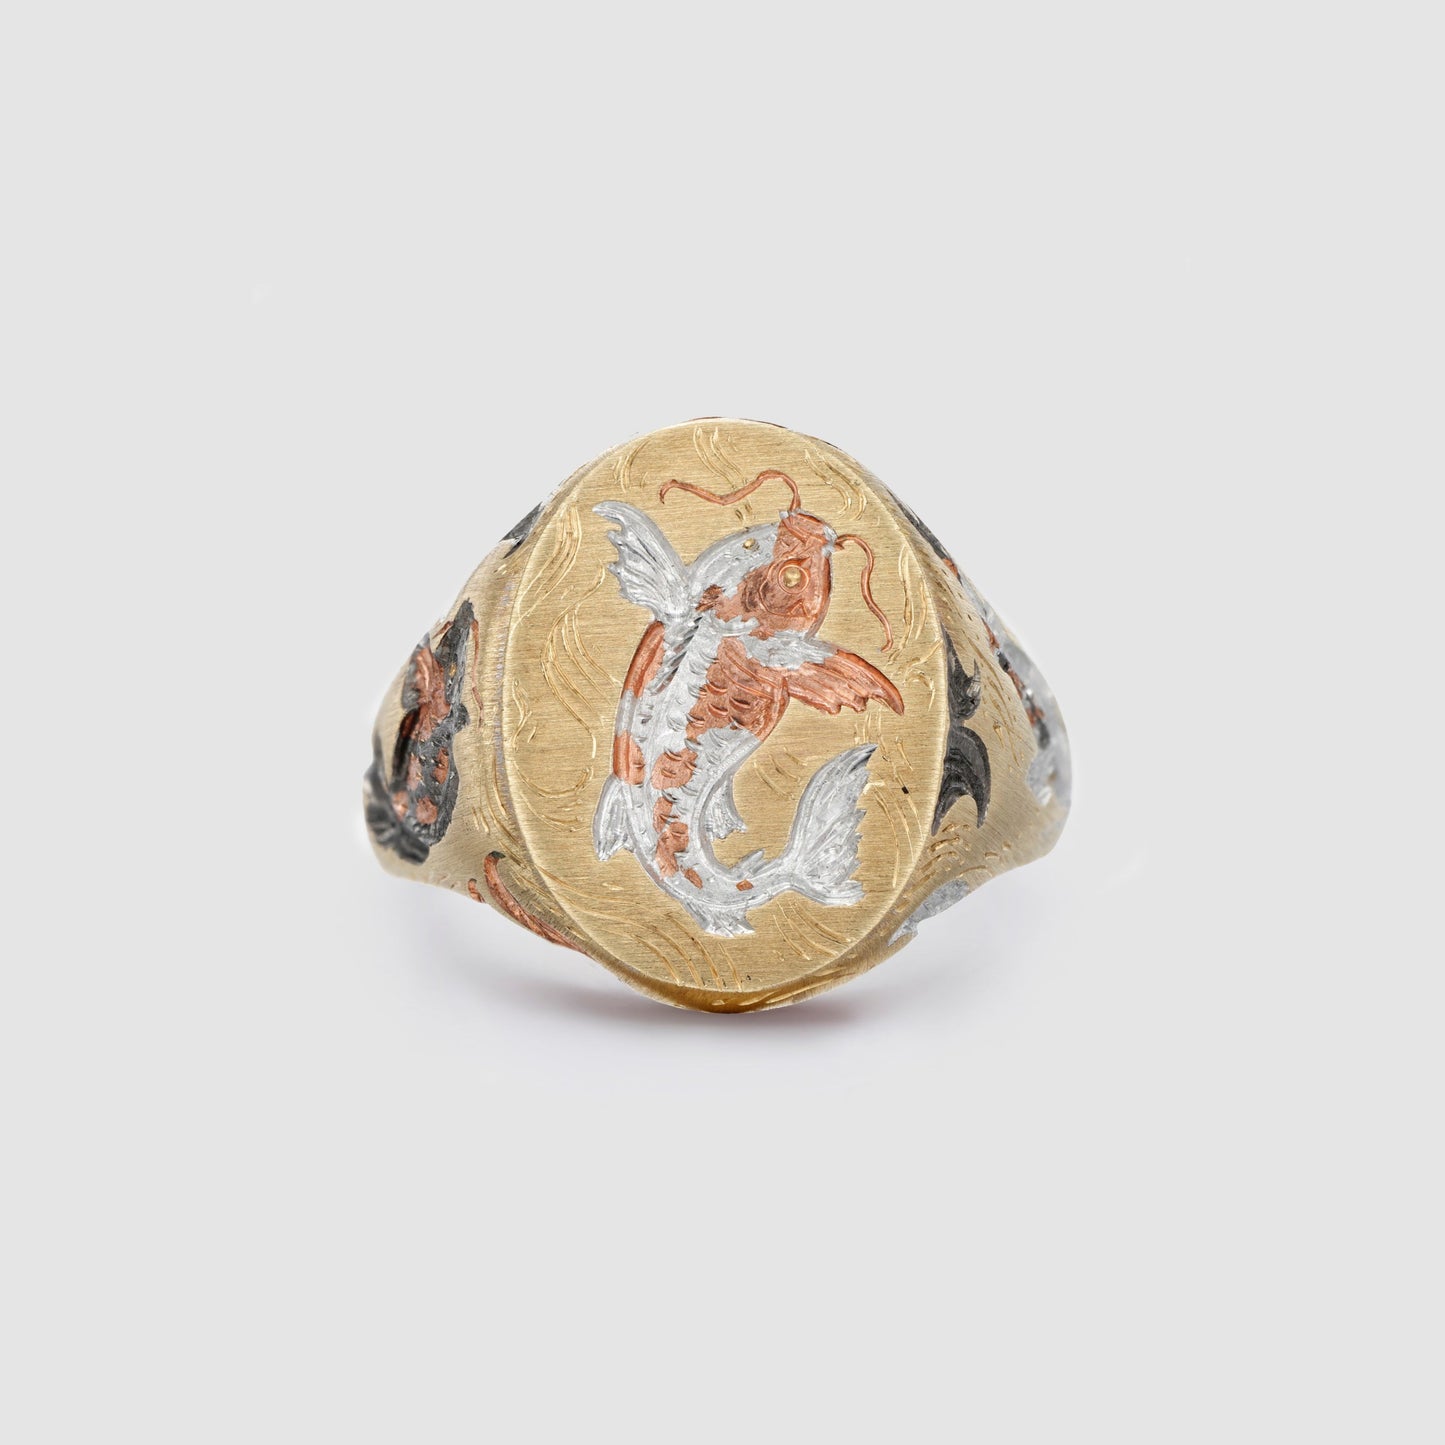 Castro Smith Jewelry Gold Koi Carp Signet Ring with Engravings.